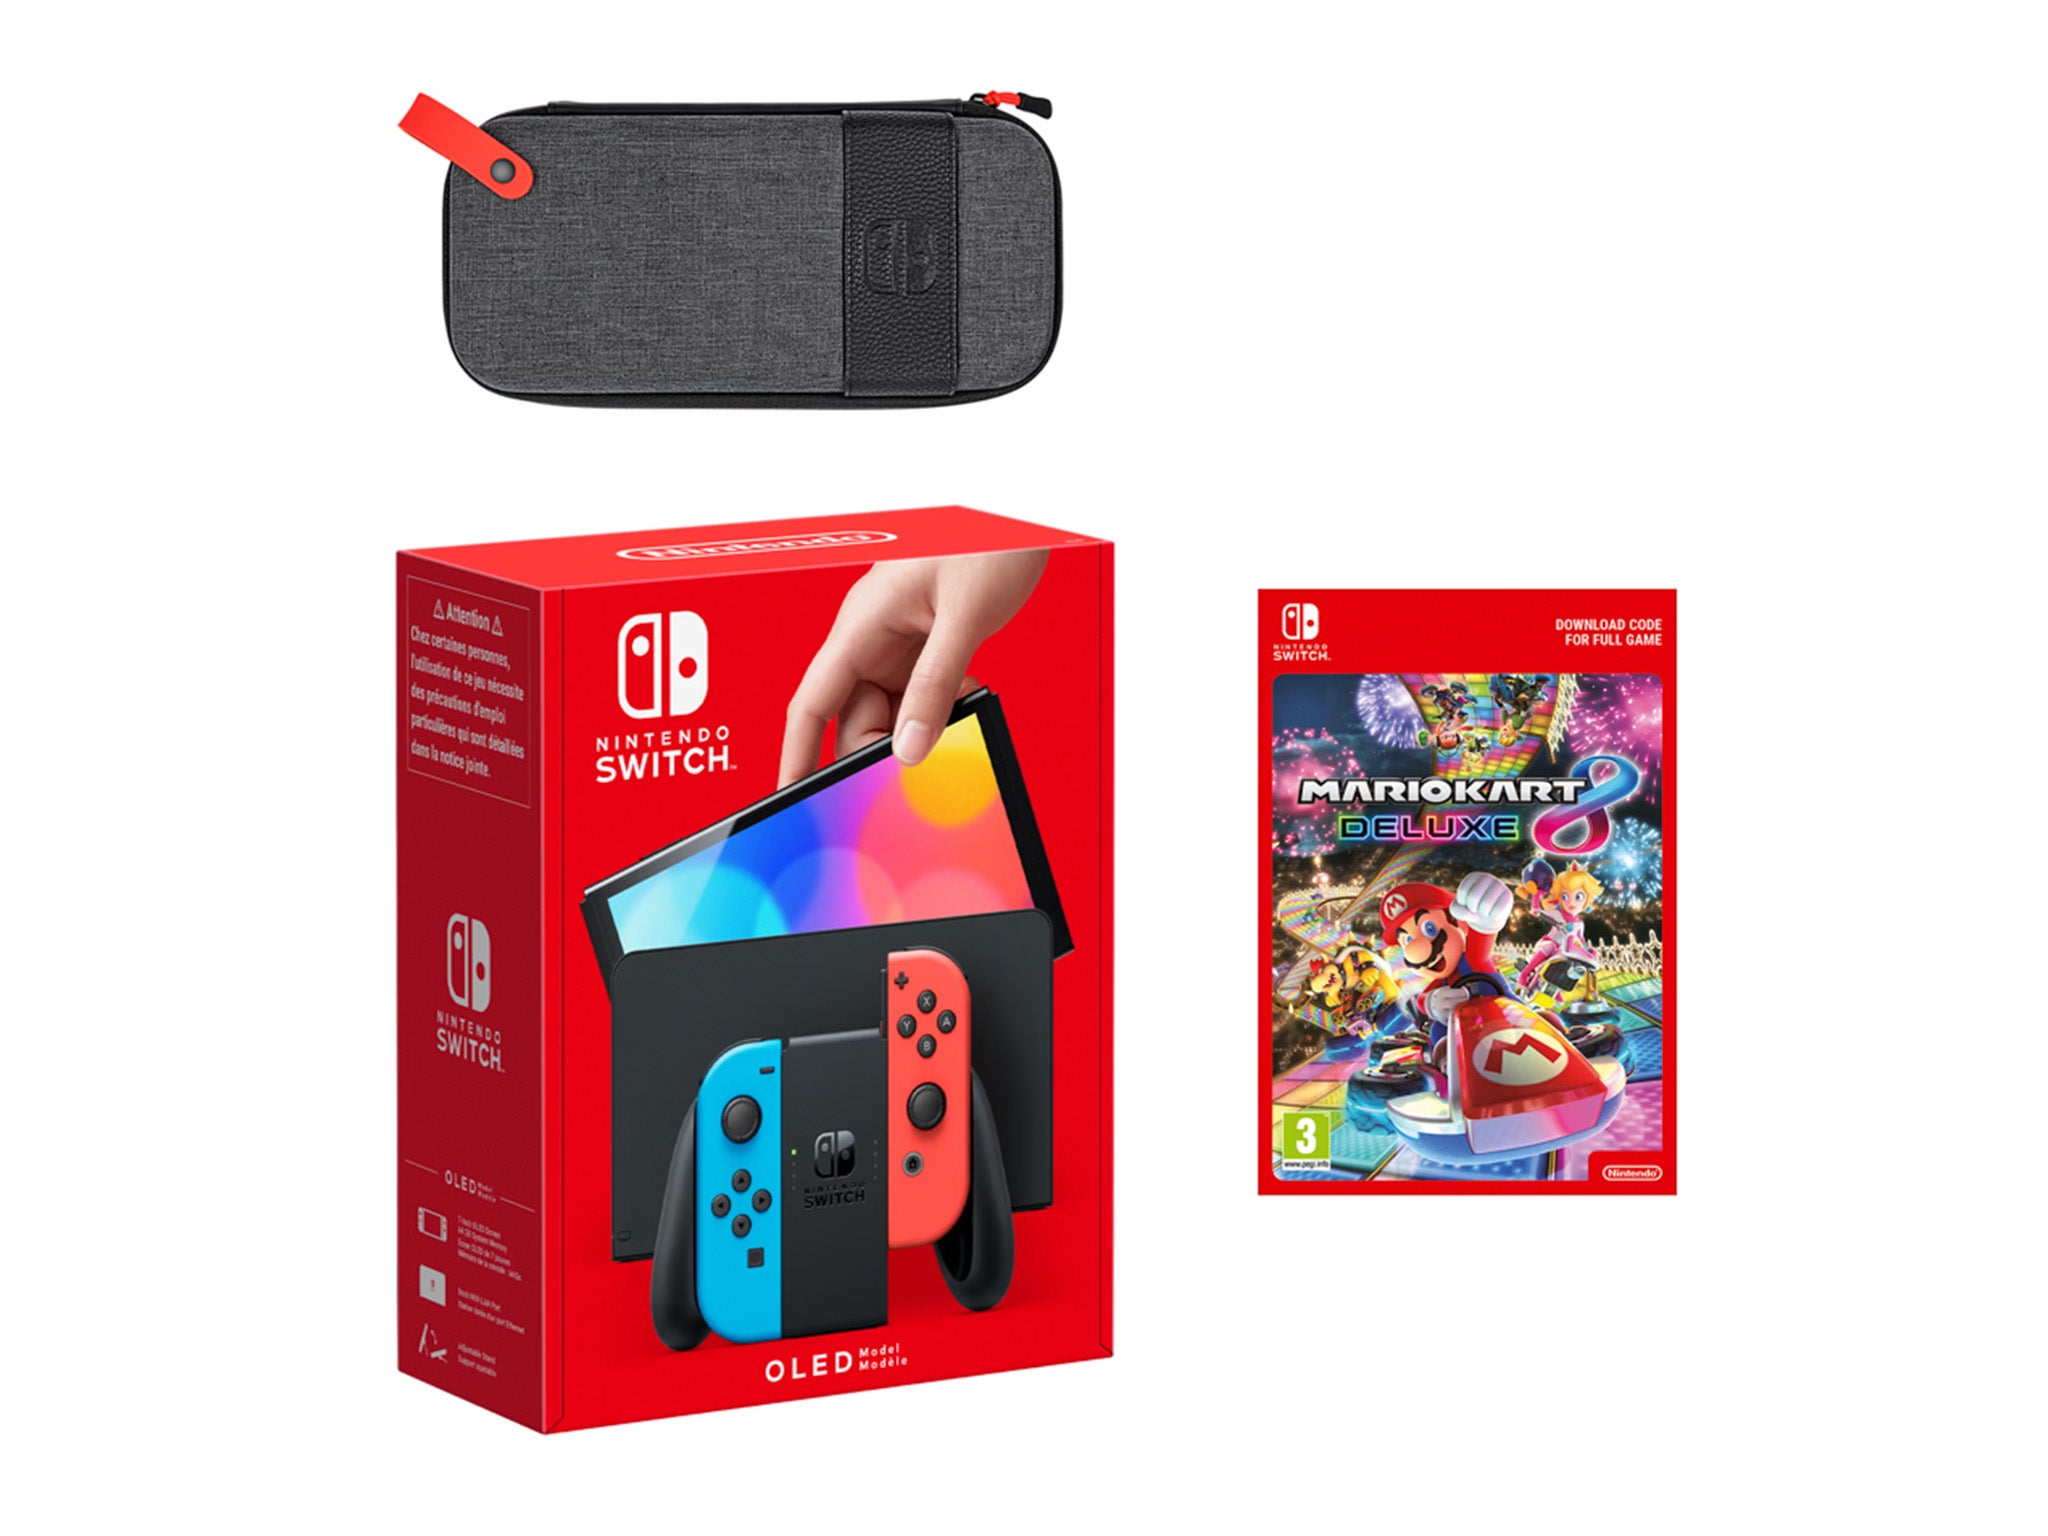 Nintendo Switch OLED with Mario Kart 8 deluxe pack